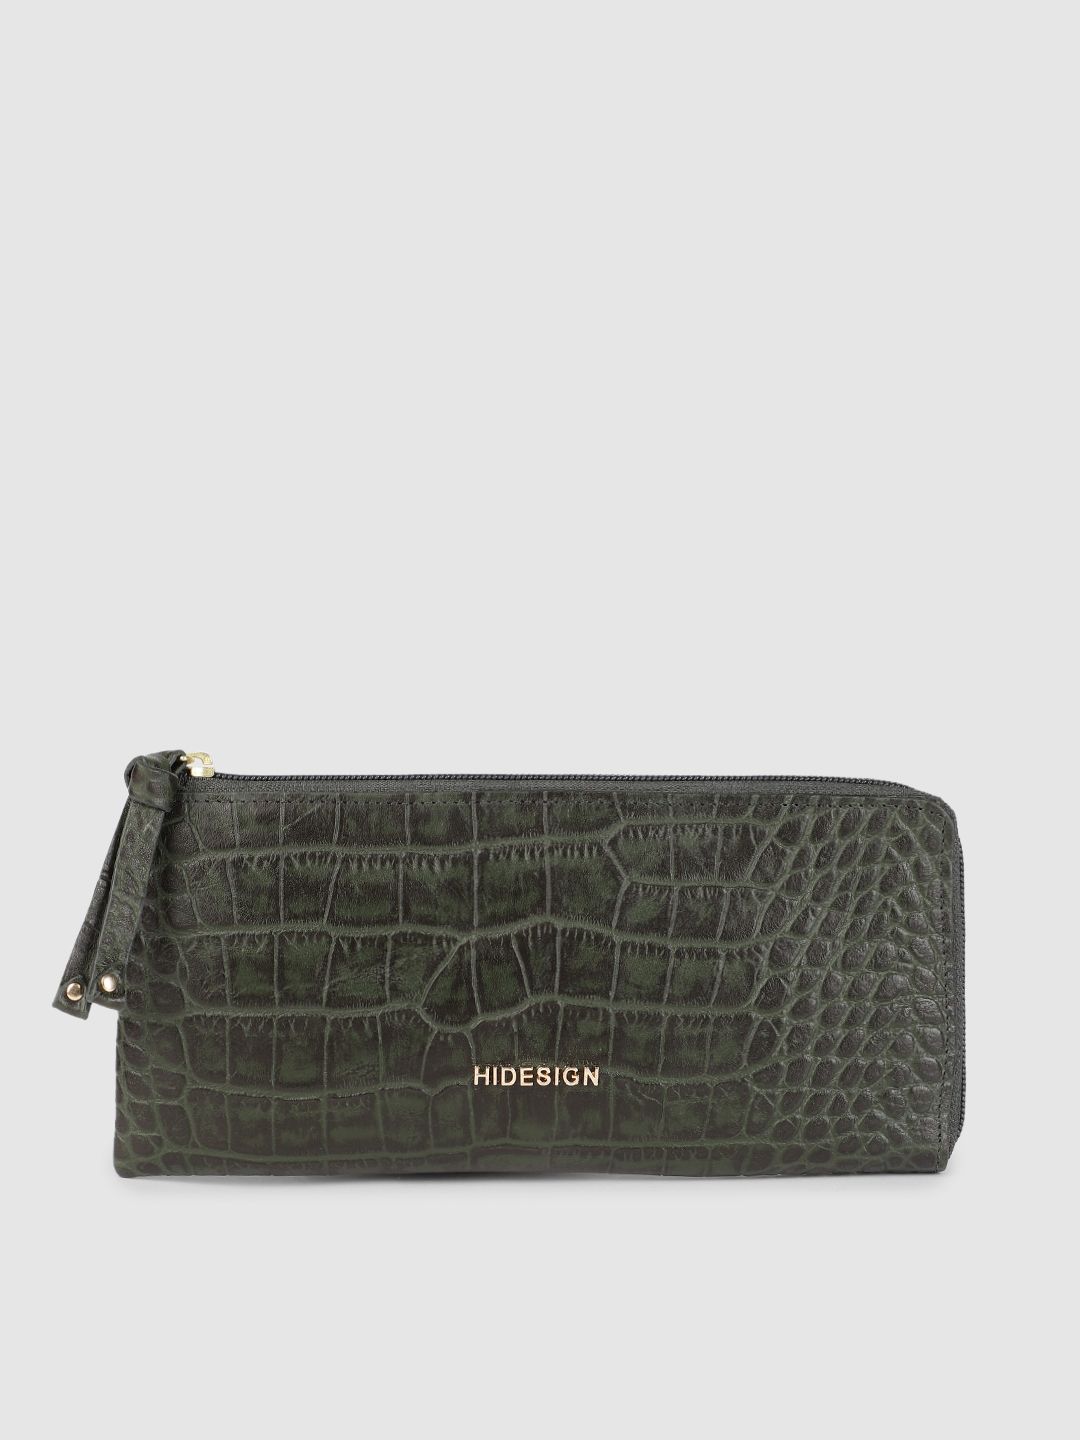 Hidesign Women Green Croc Textured Leather Two Fold Wallet Price in India